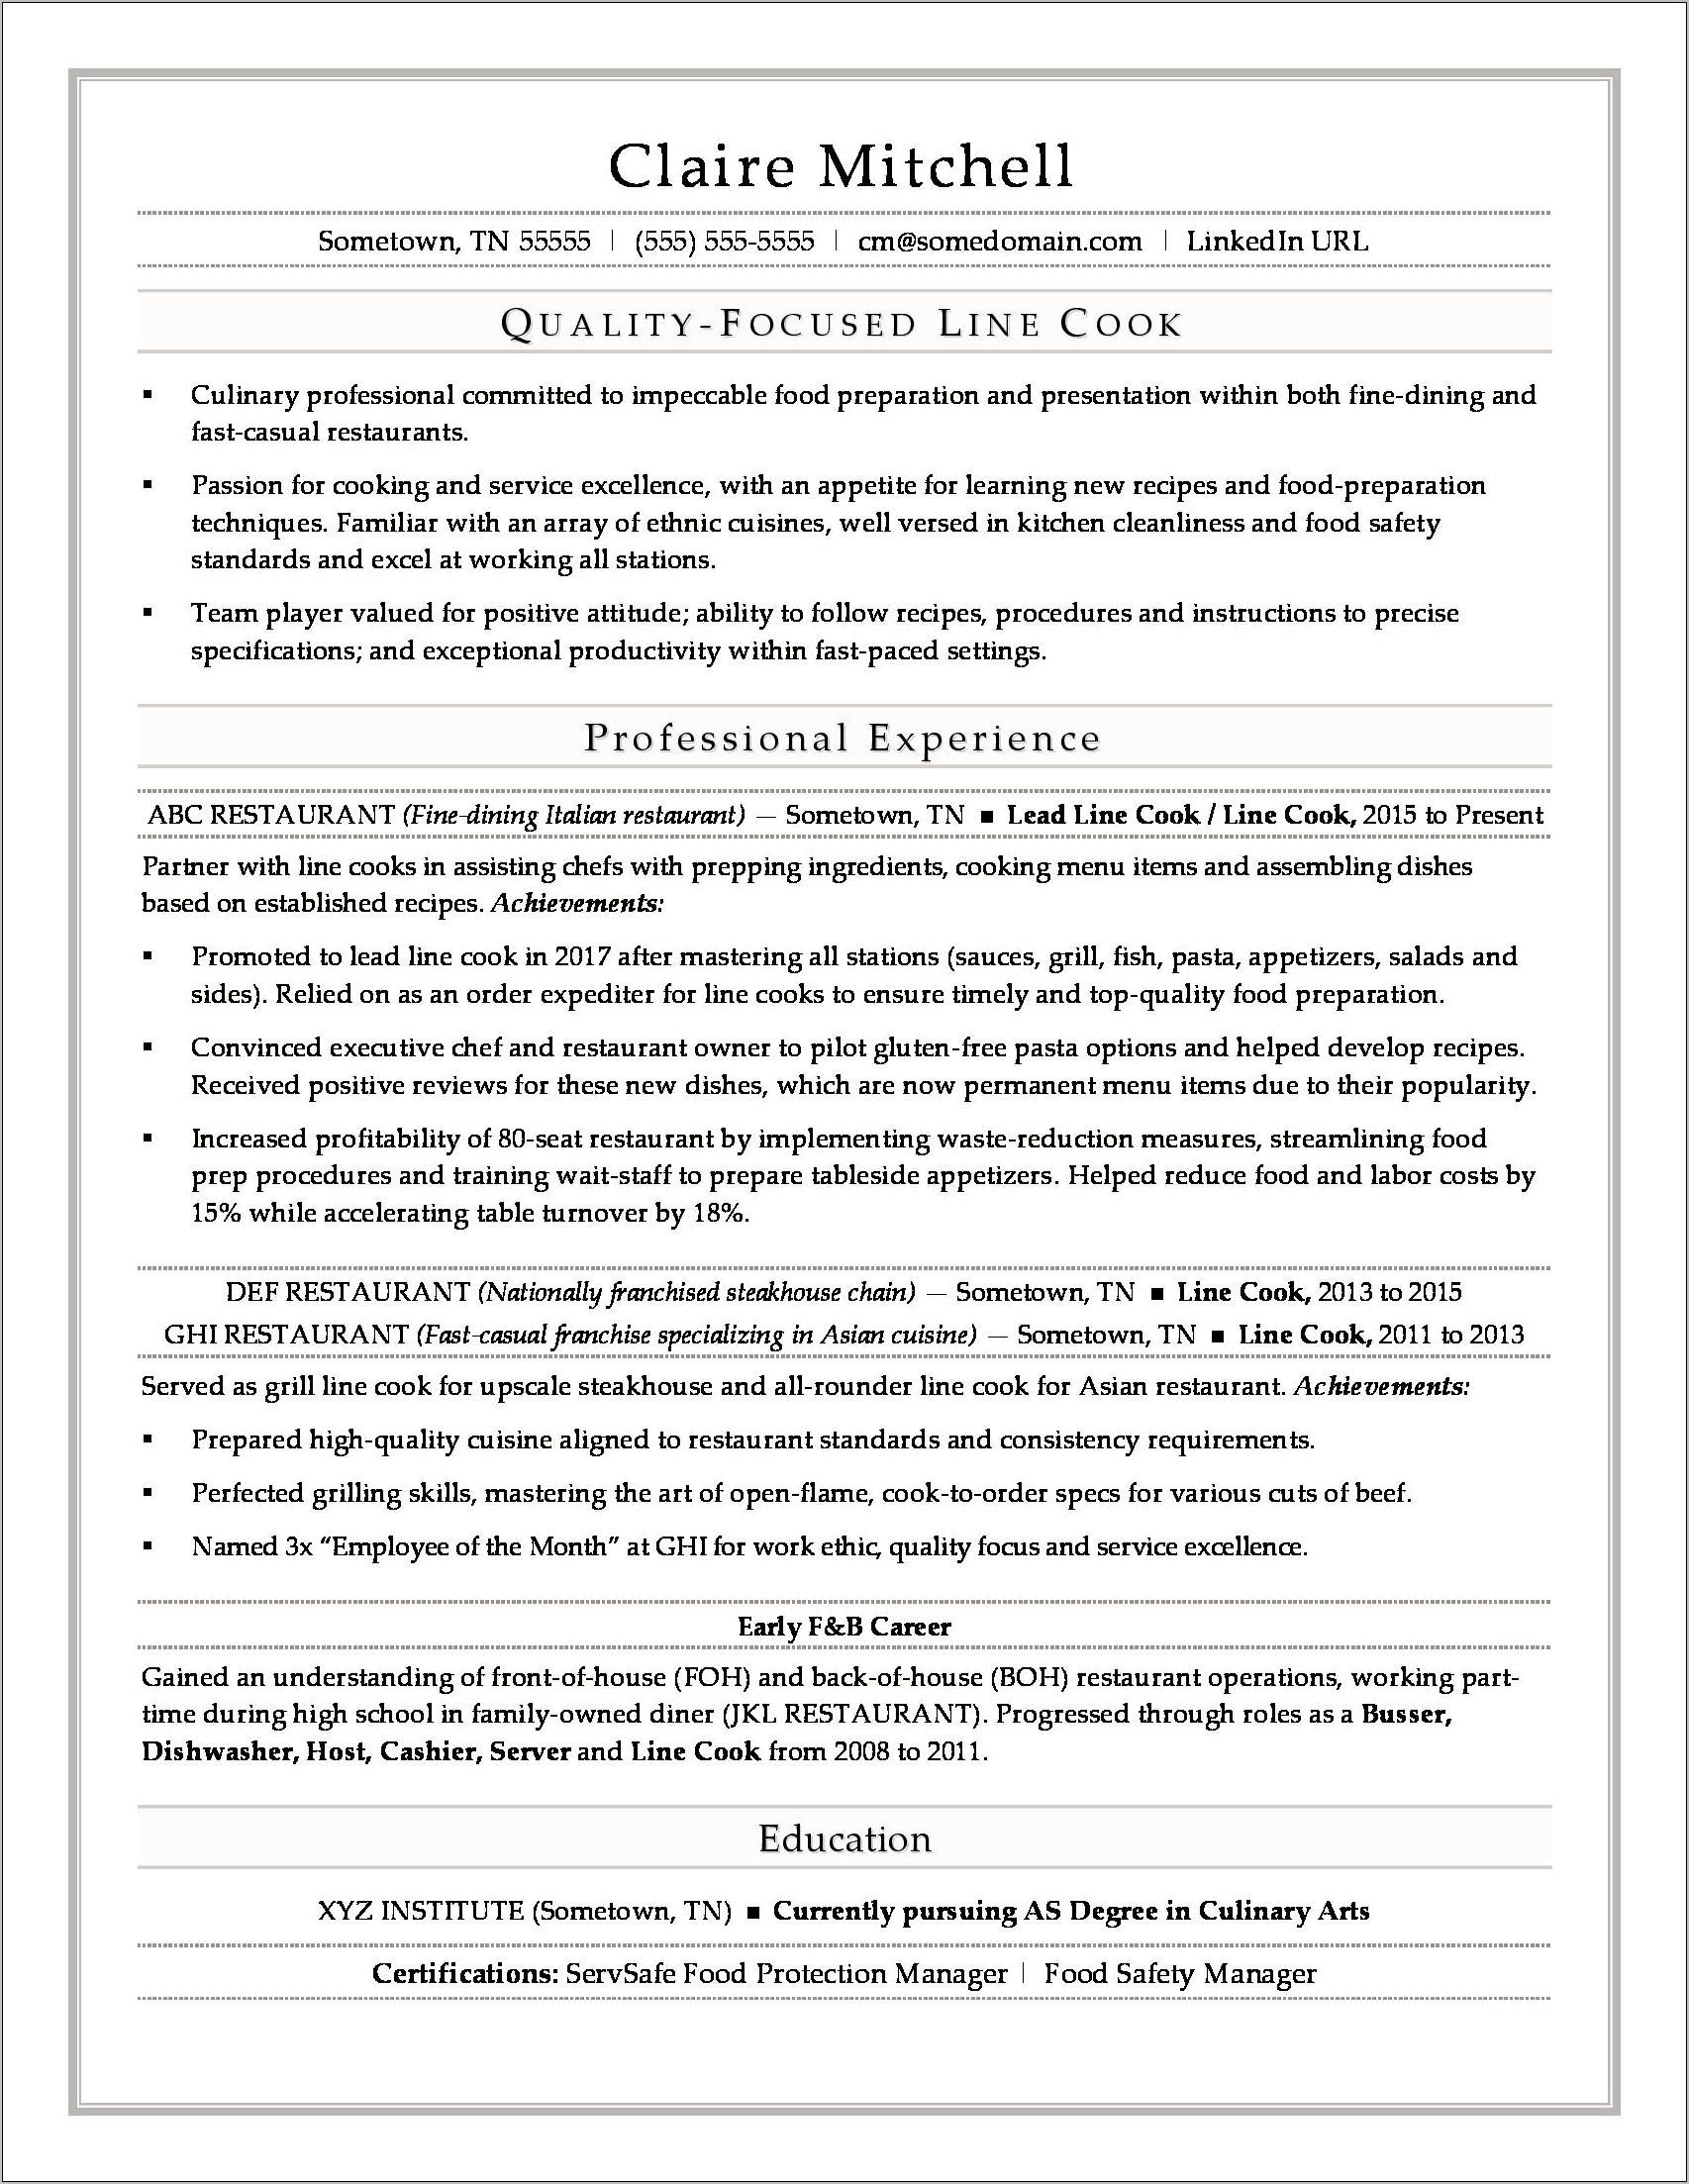 Professional Summary For Resume For Restaurant